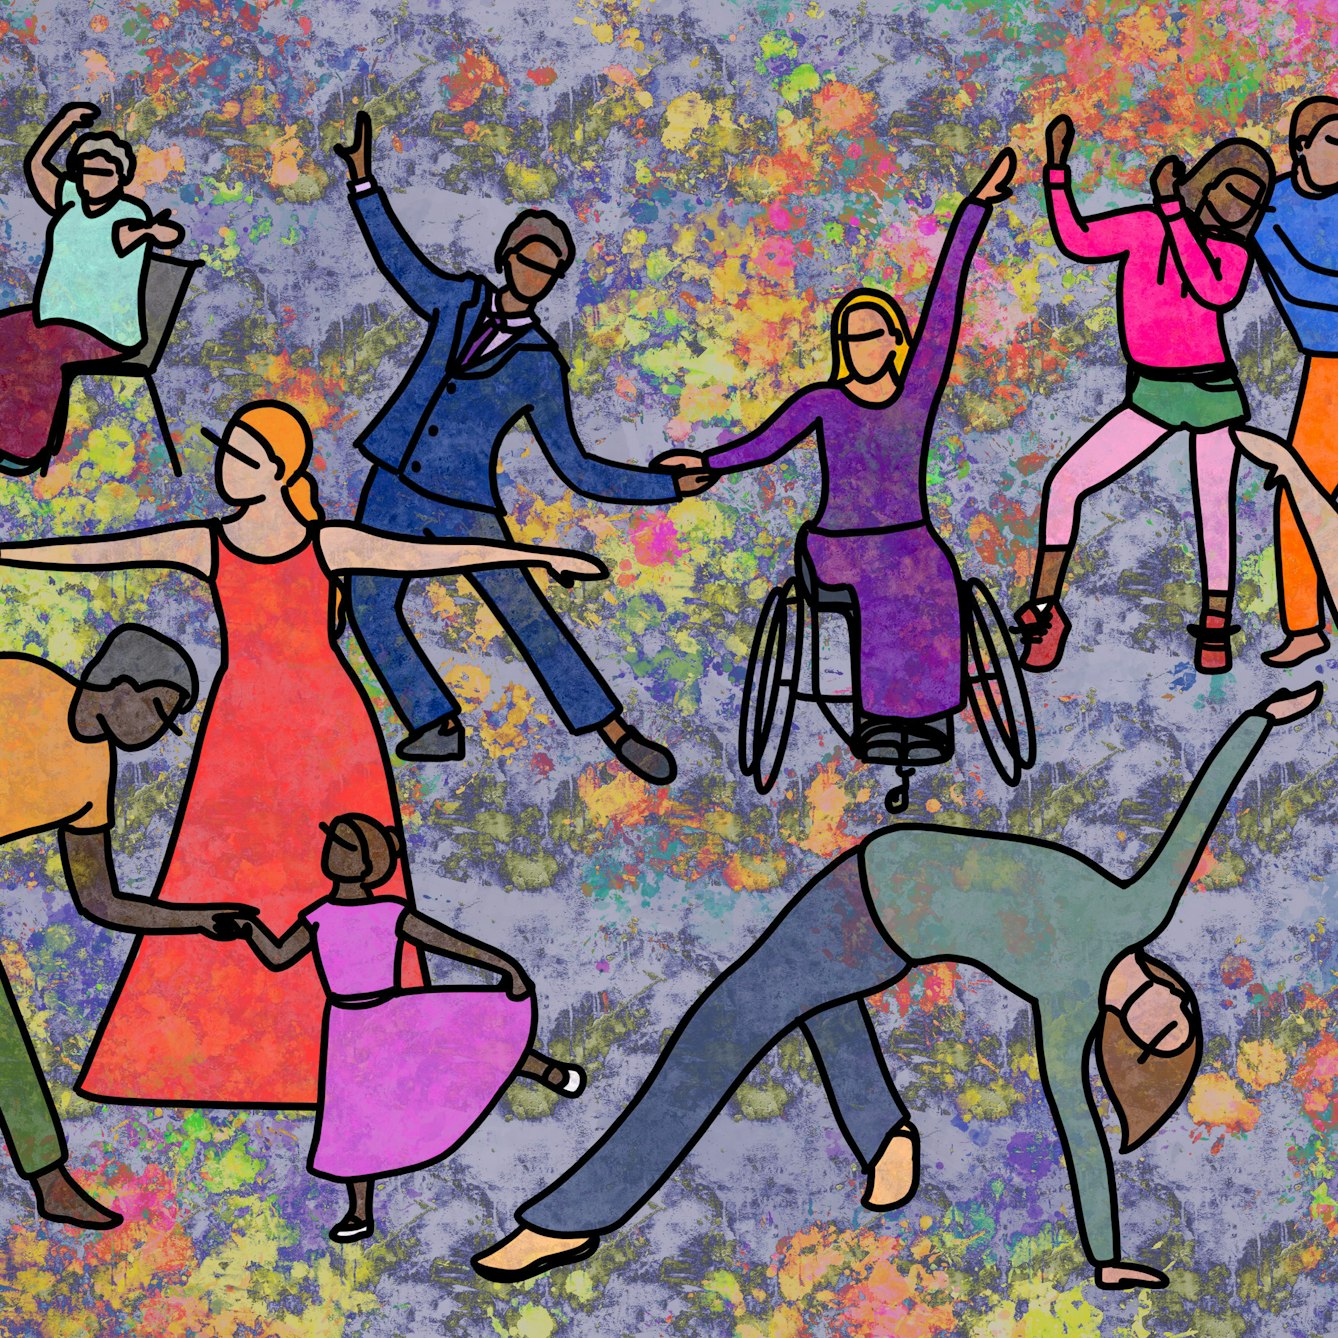 Colourful digital artwork made up of a mottled, paint splattered background containing mauves, greens, pinks, yellow and oranges. On top of the background are 13 black outlined figures of all ages, genders, abilities and ethnicities. Everyone is pictured in the middle of a dance move. They are all dressed in bright coloured clothing.